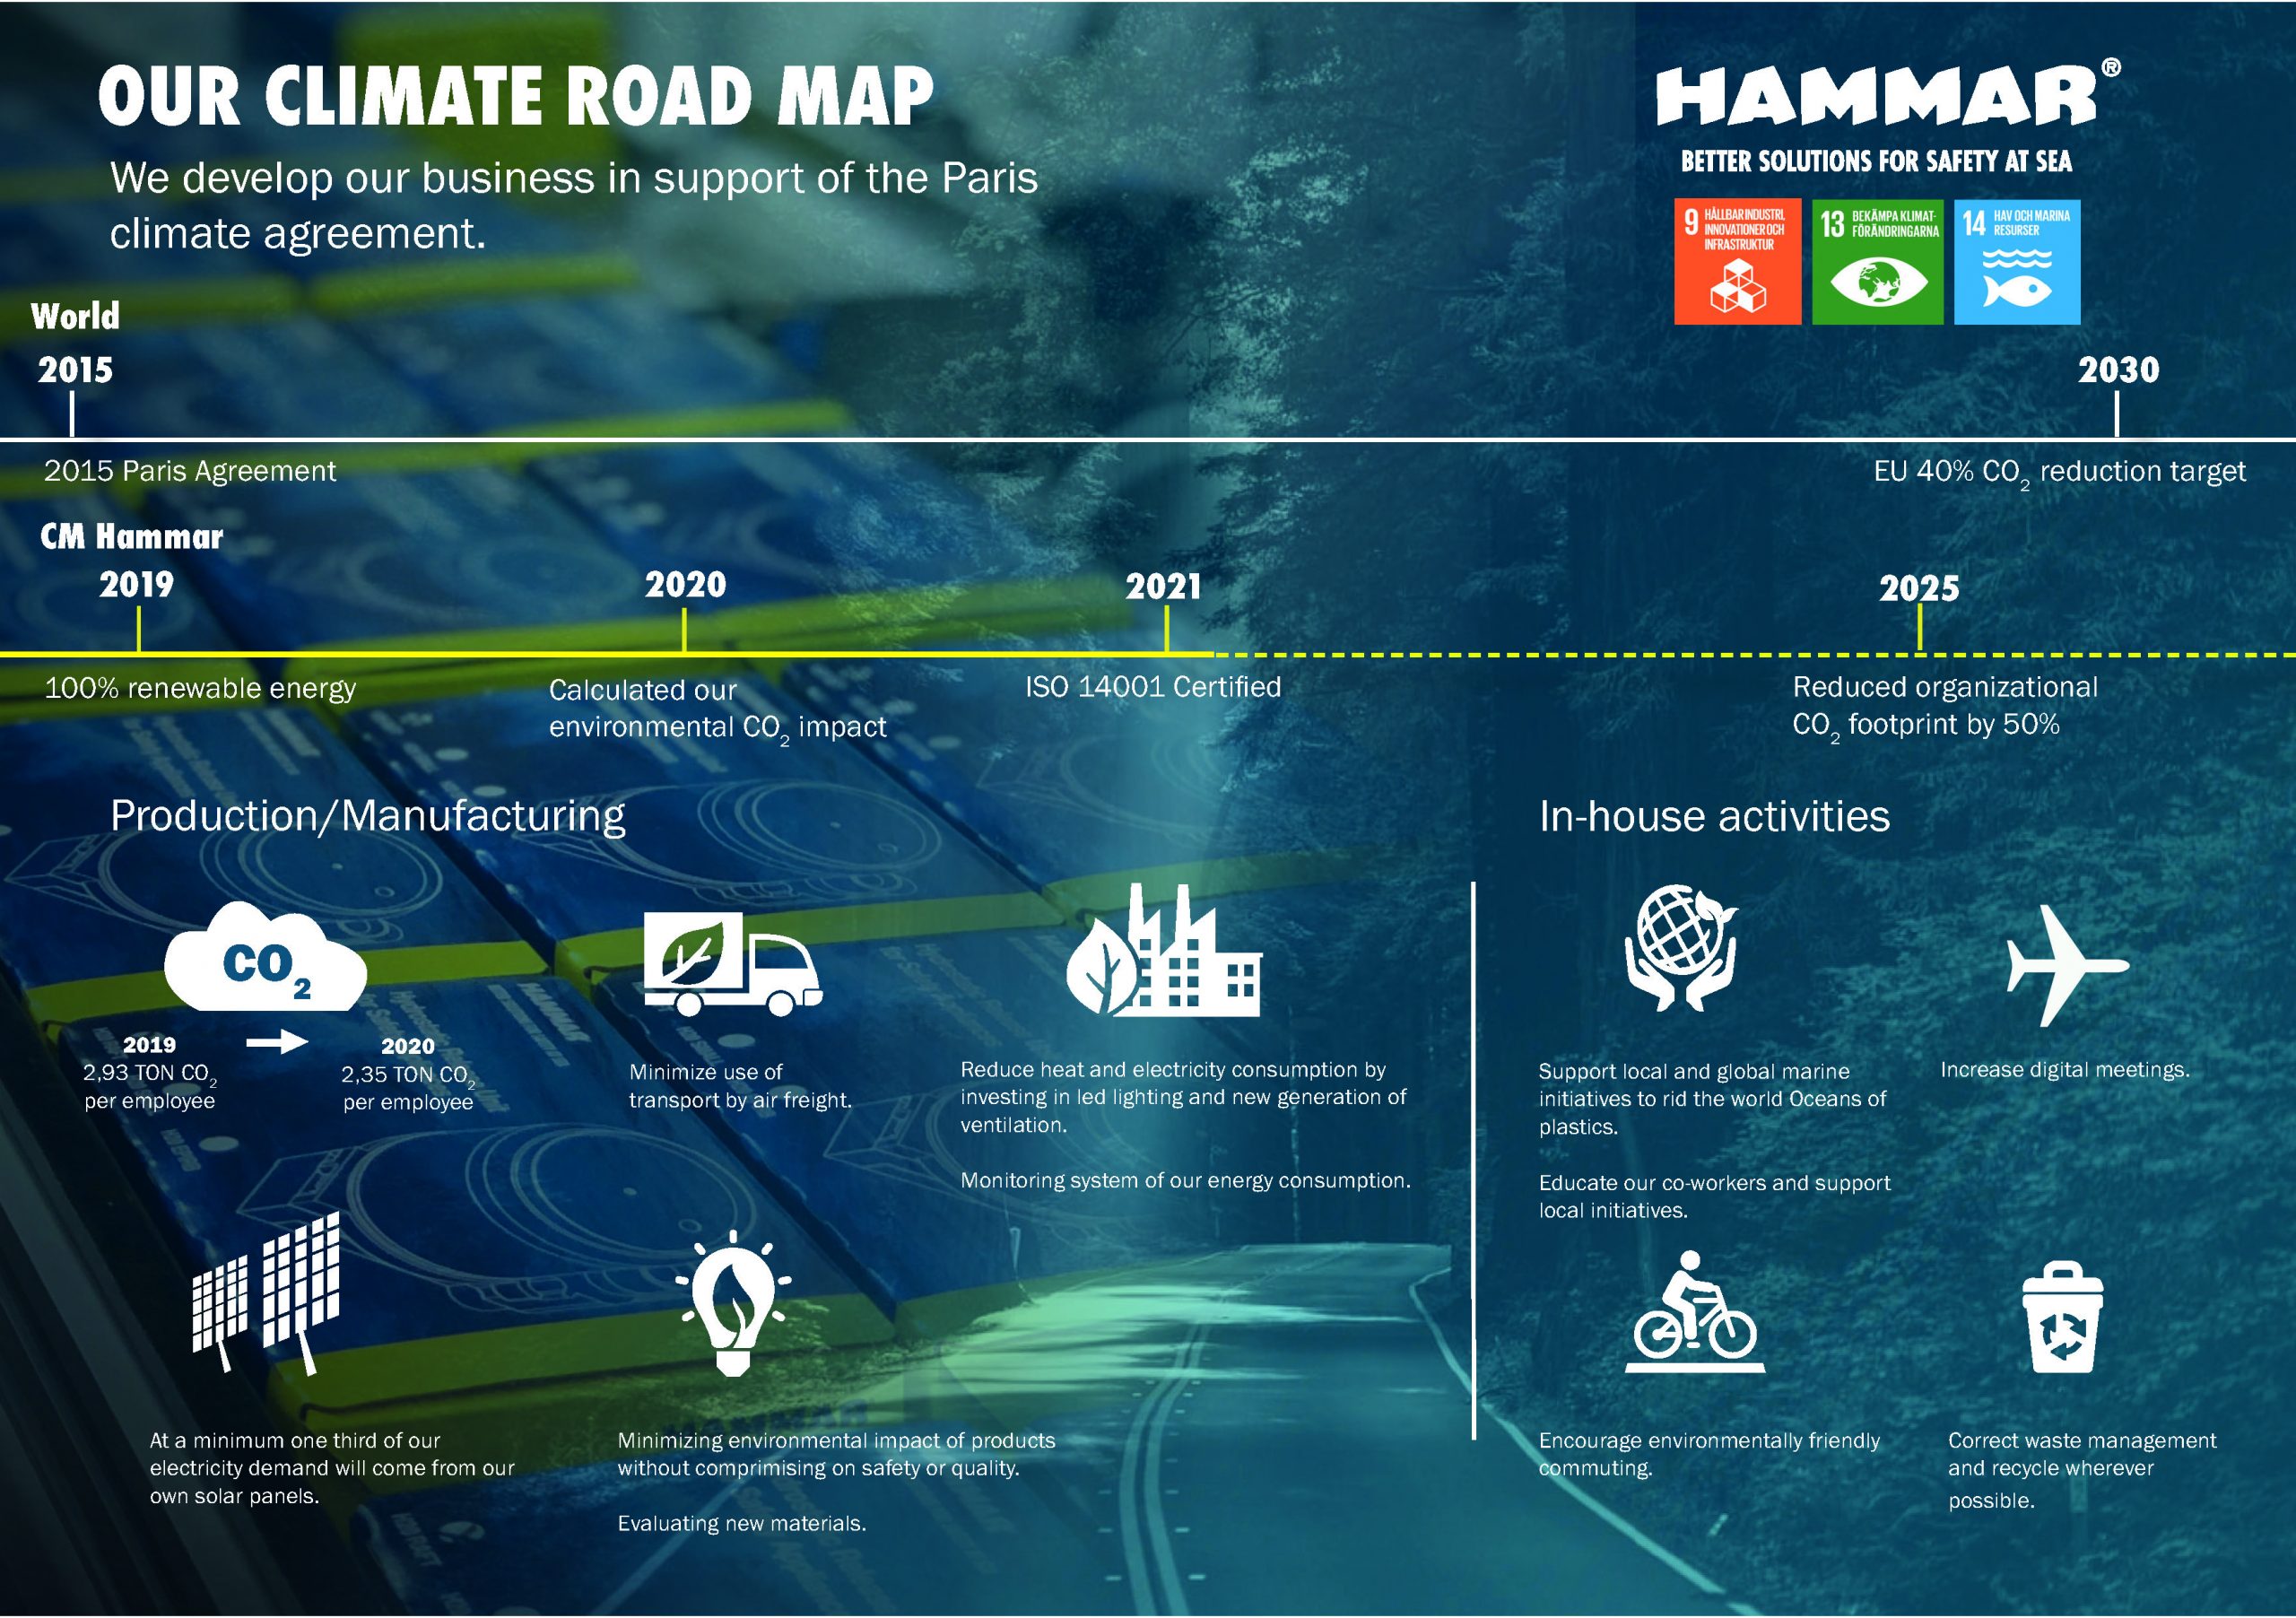 Our climate road map